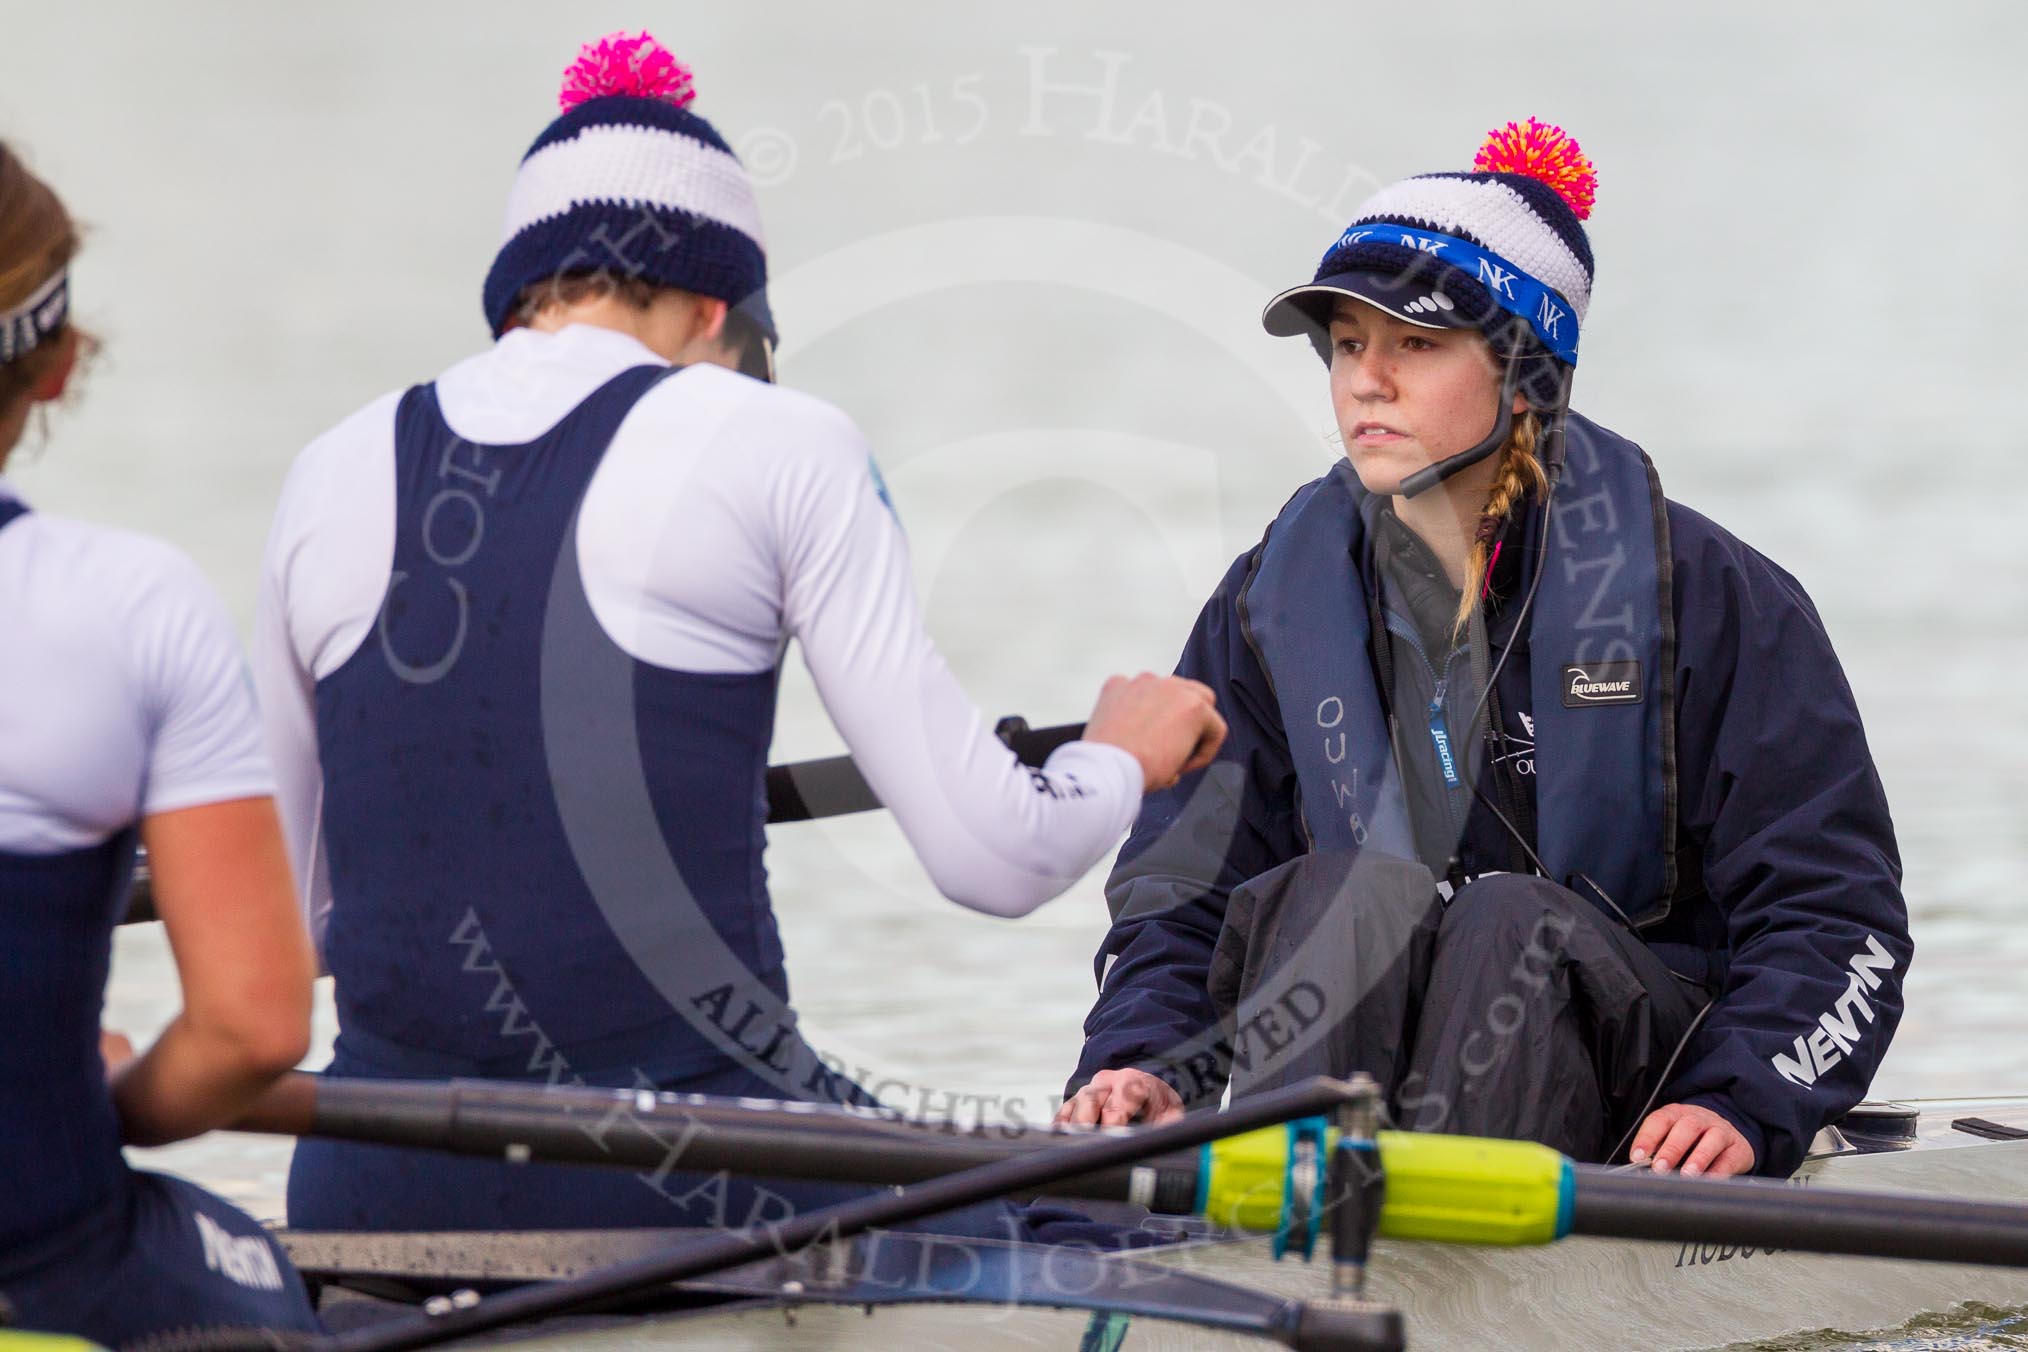 The Boat Race season 2015: OUWBC training Wallingford.

Wallingford,

United Kingdom,
on 04 March 2015 at 16:40, image #222